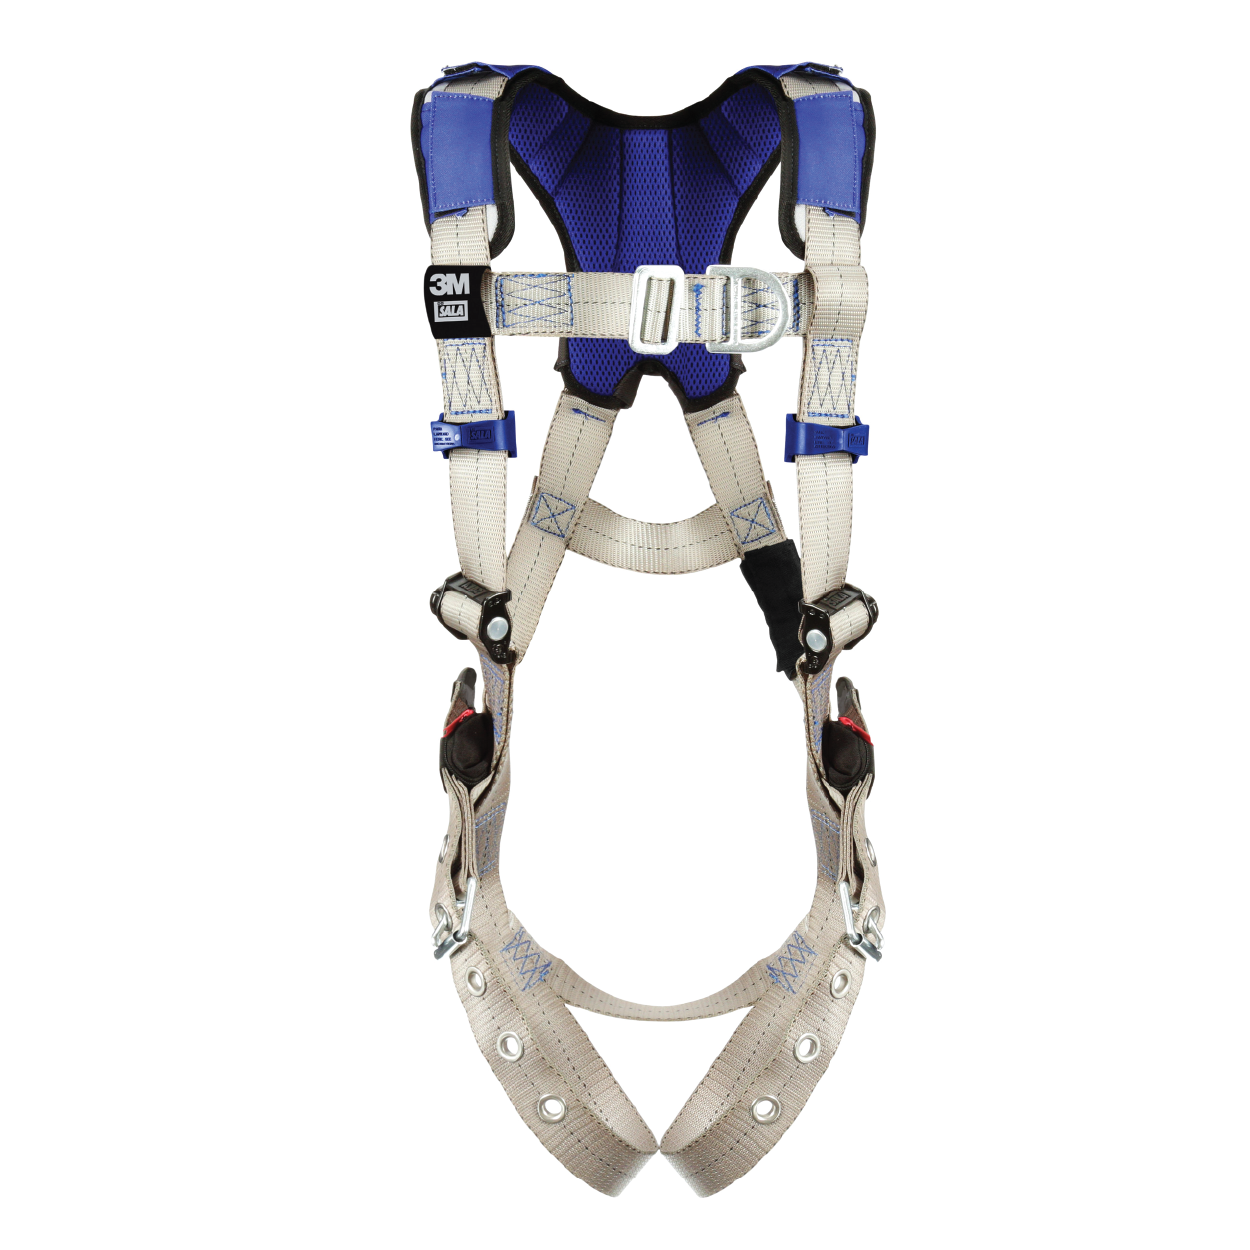 Durable Fall Arrest Harnesses